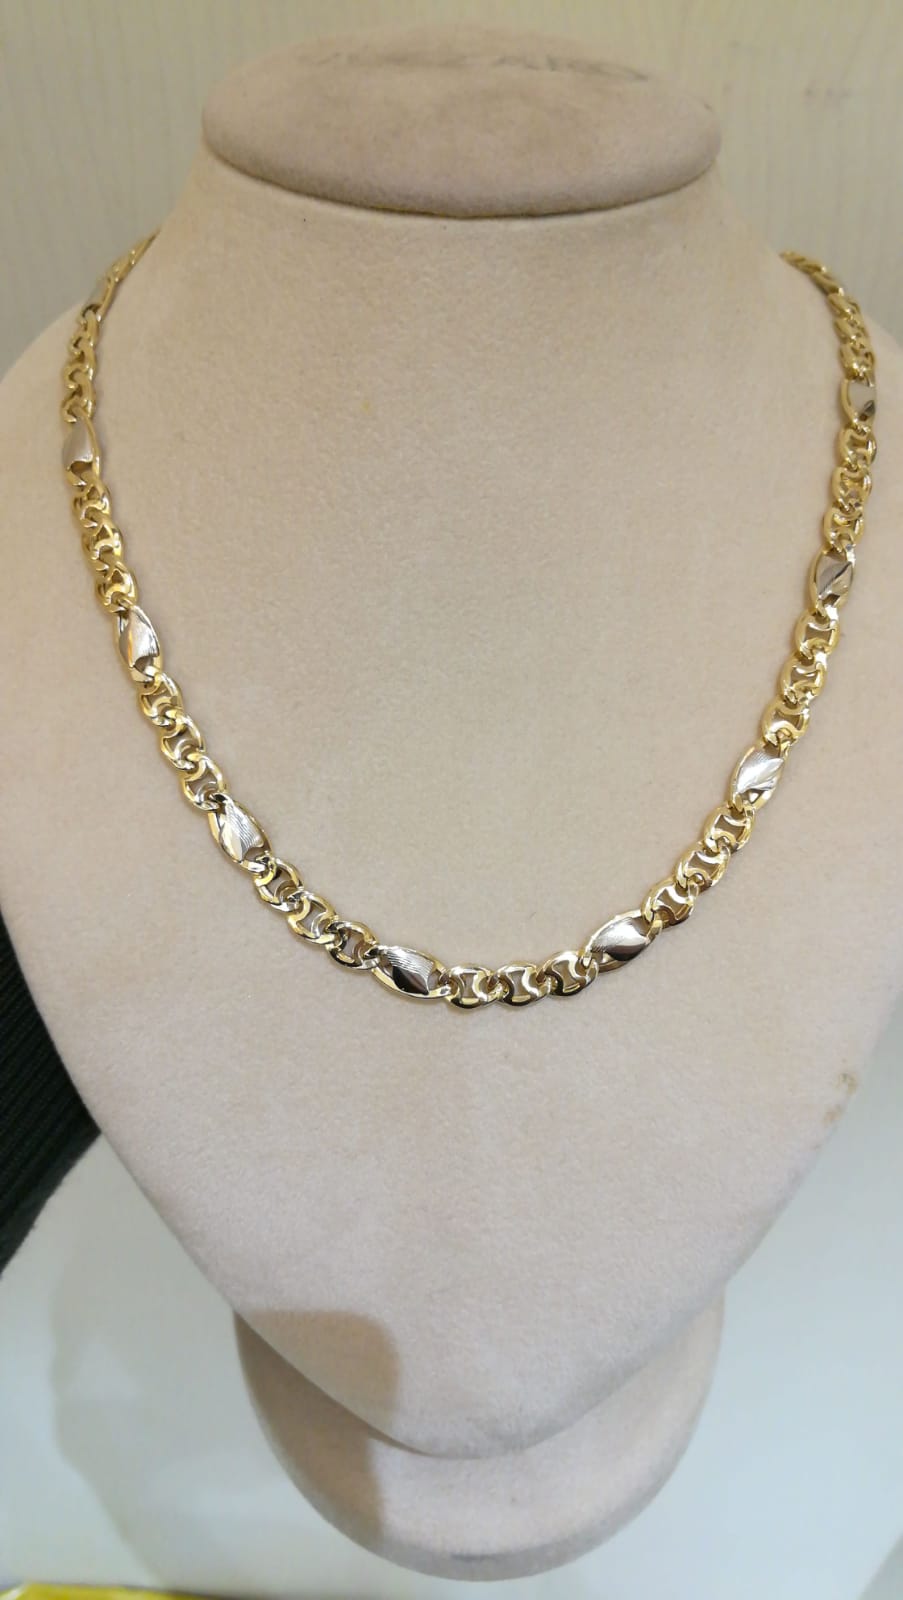 Two-tone necklace 750% gold